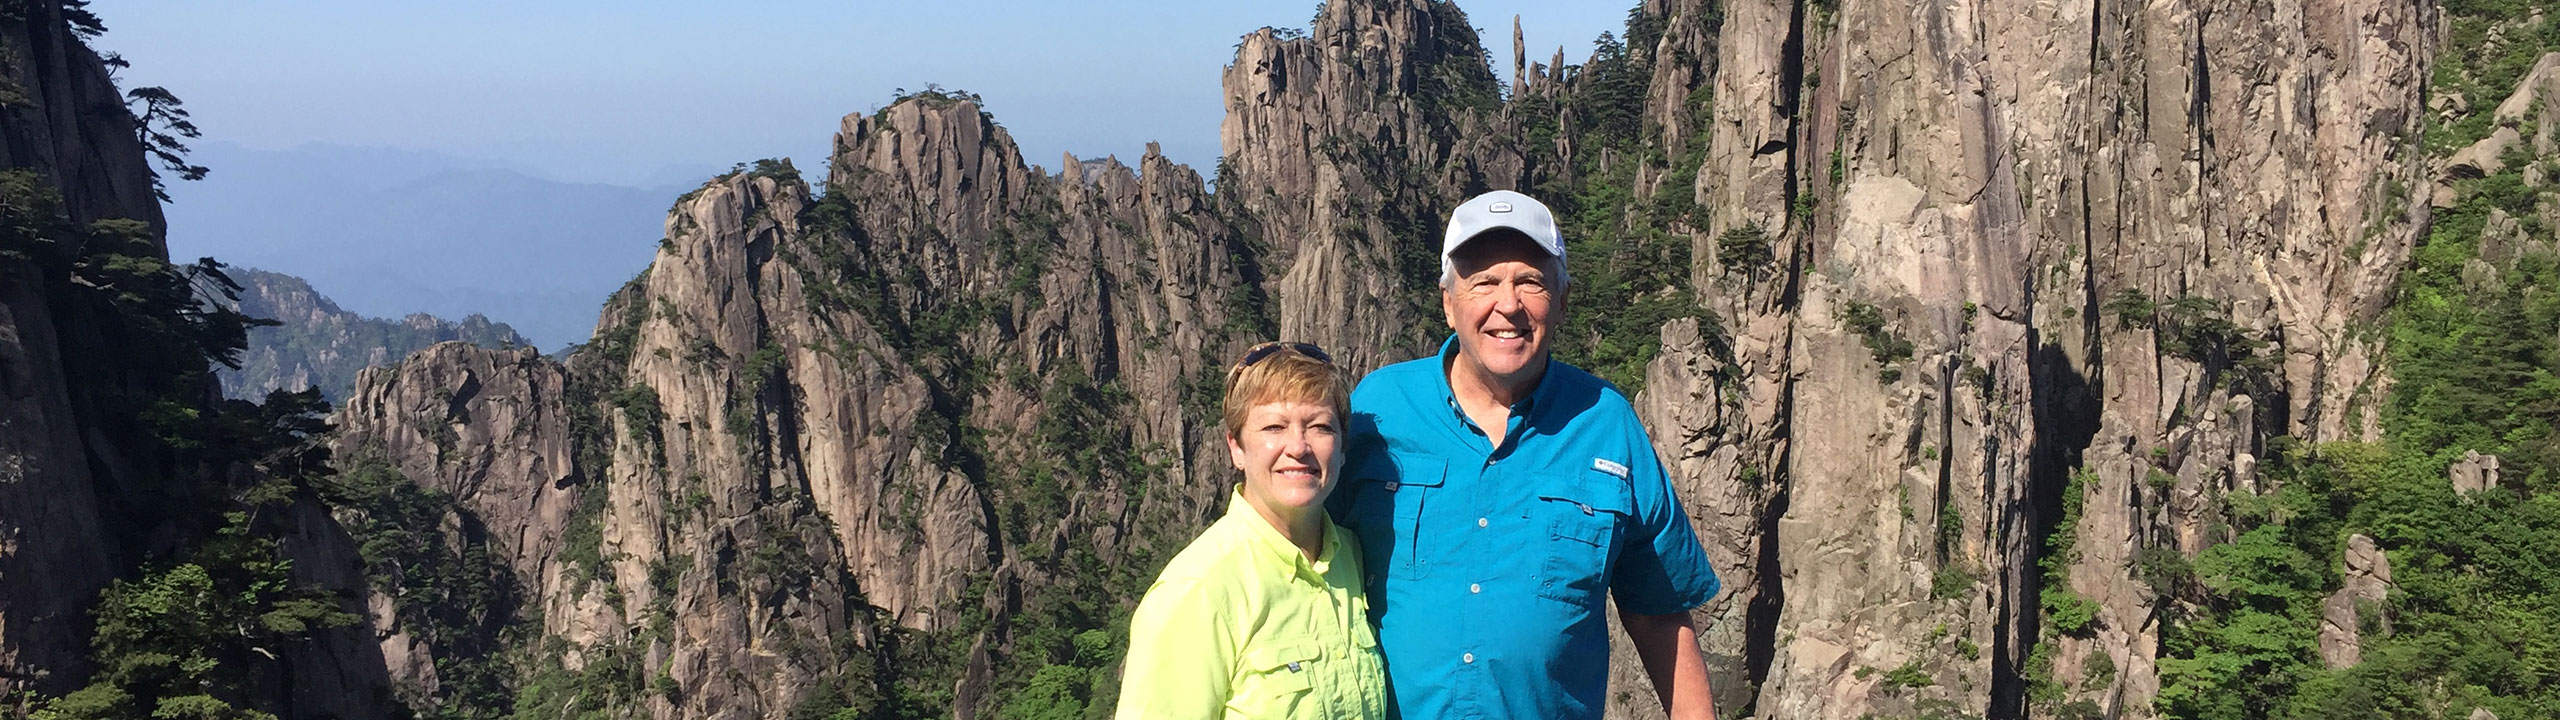 Théa and Markus Natri from Finland Customized a 15 Days Shanghai Hangzhou Huangshan/Yellow Mt. and Guilin Tour